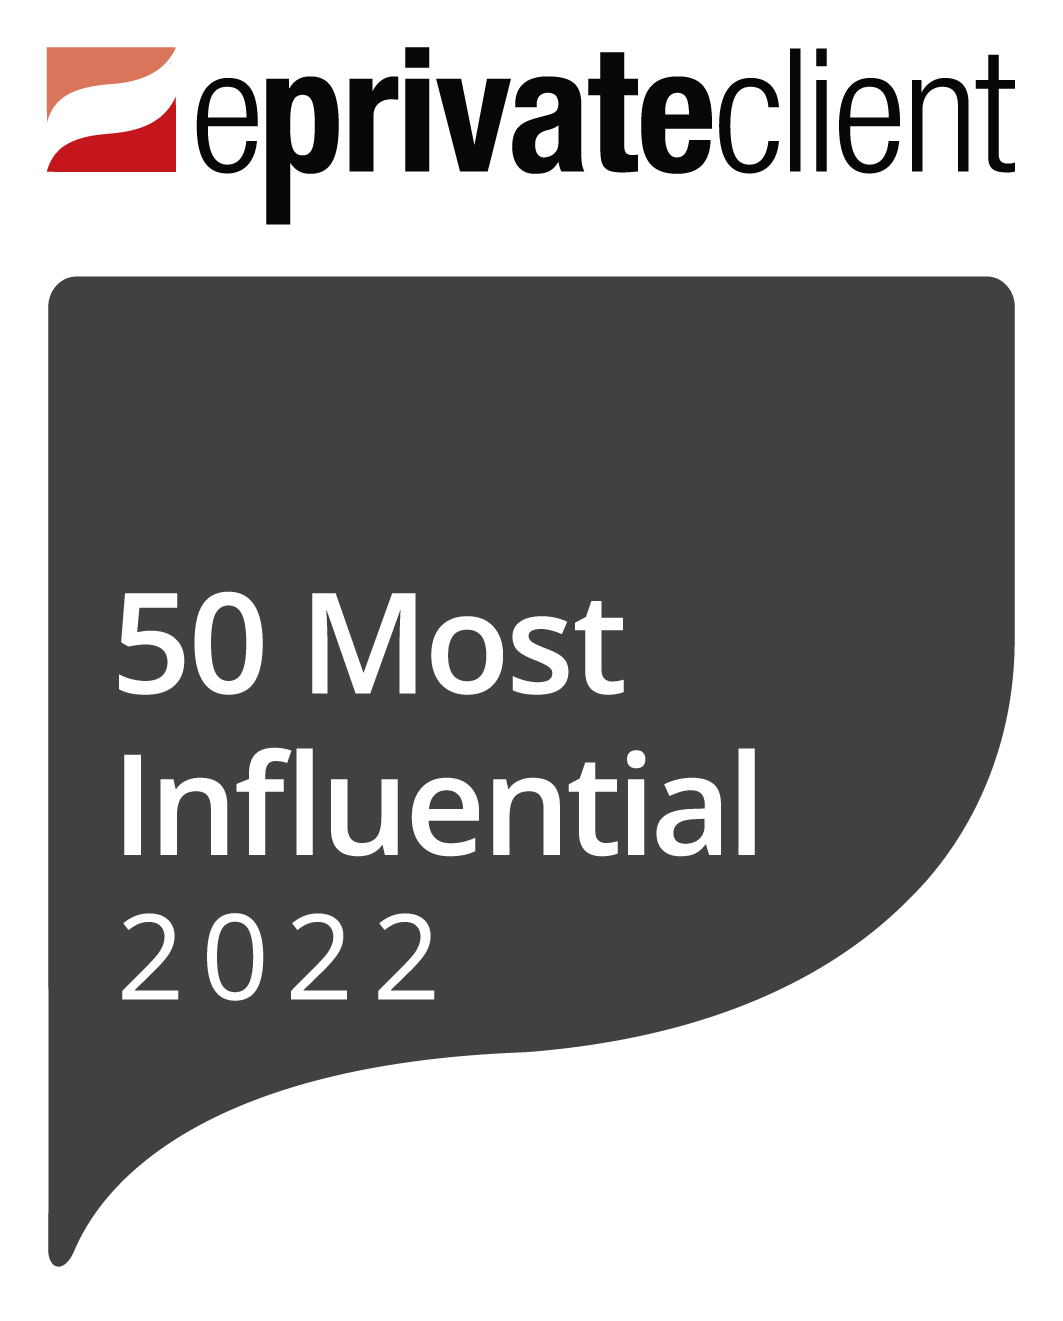 Nominations are now open for the 2022 eprivateclient 50 Most Influential